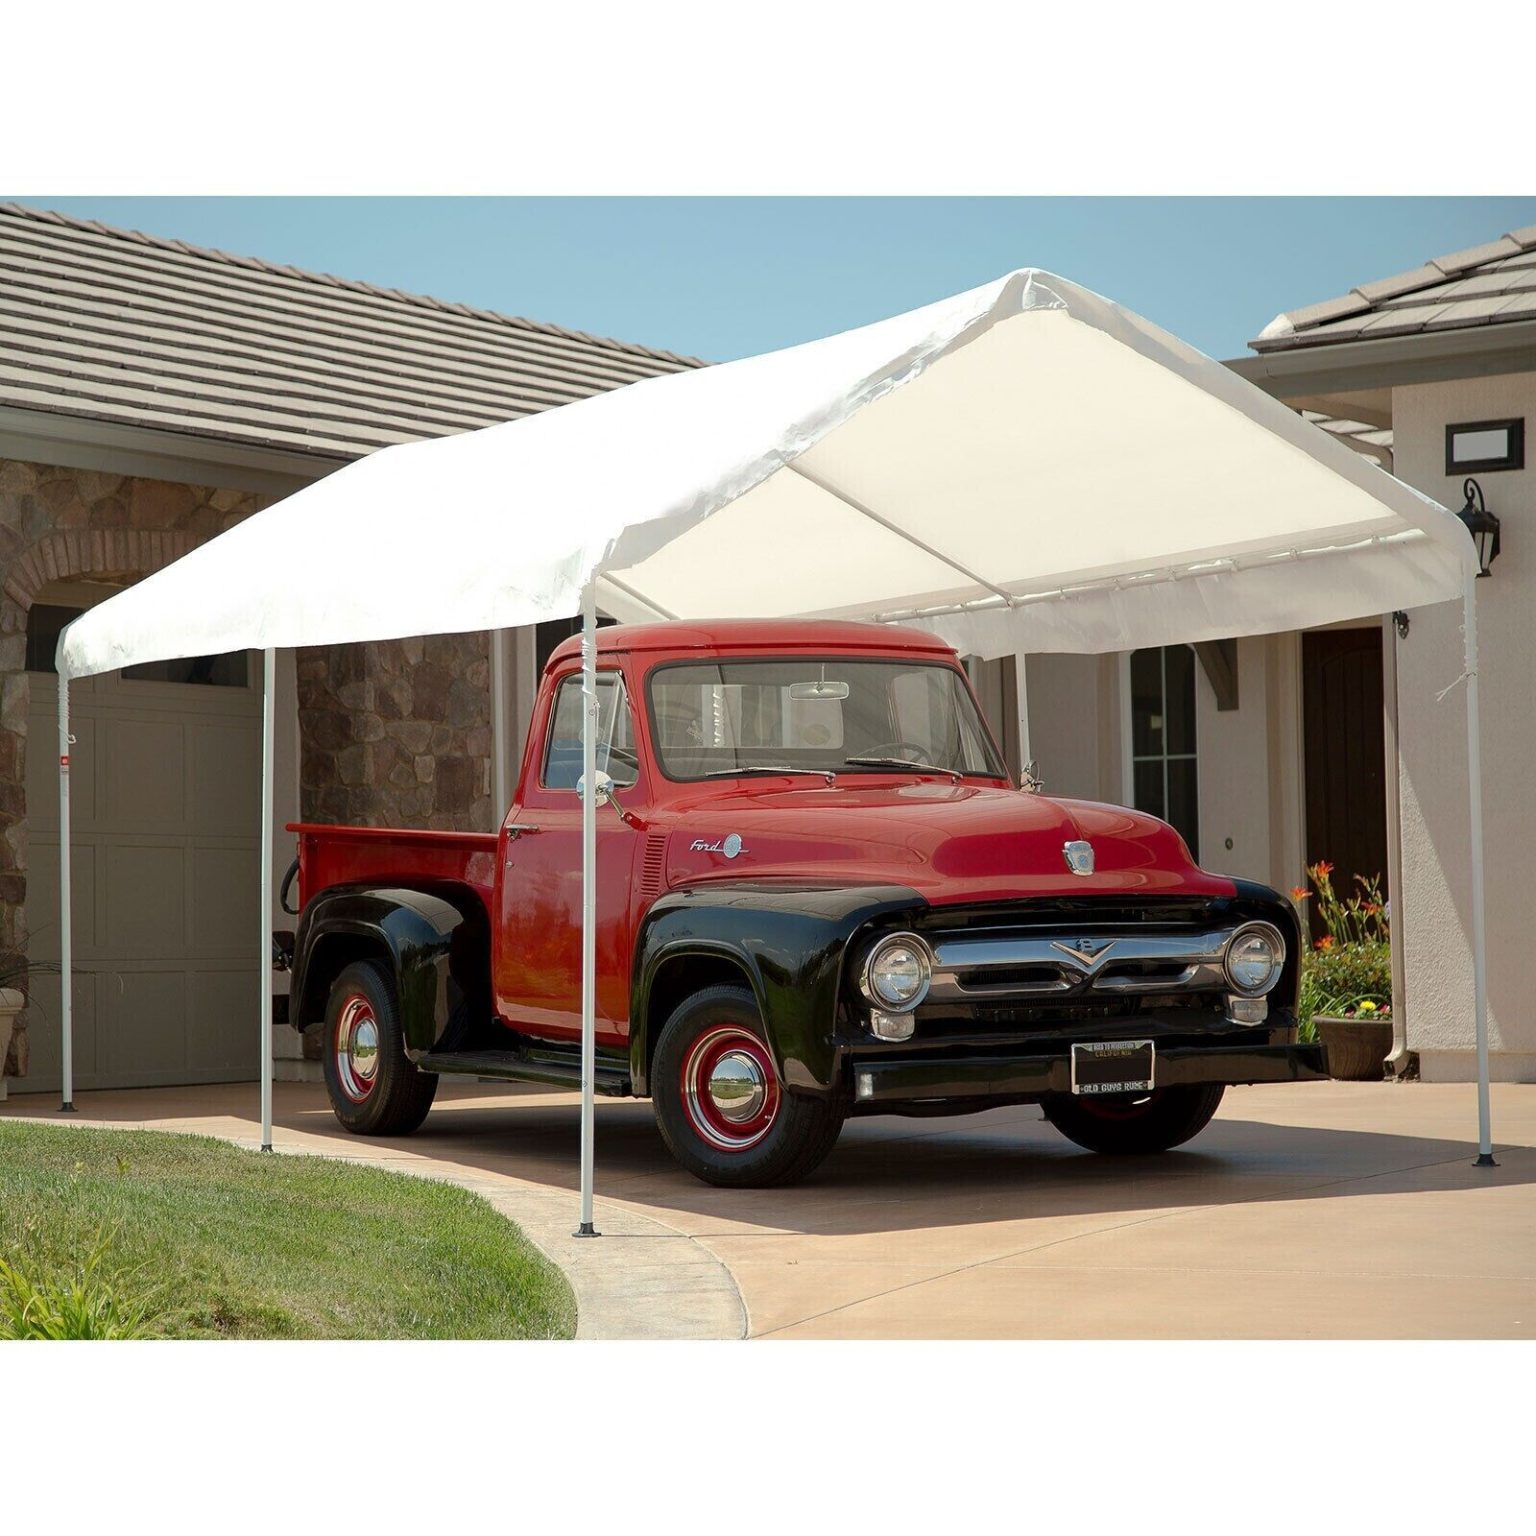 carport portable over red truck in driveway